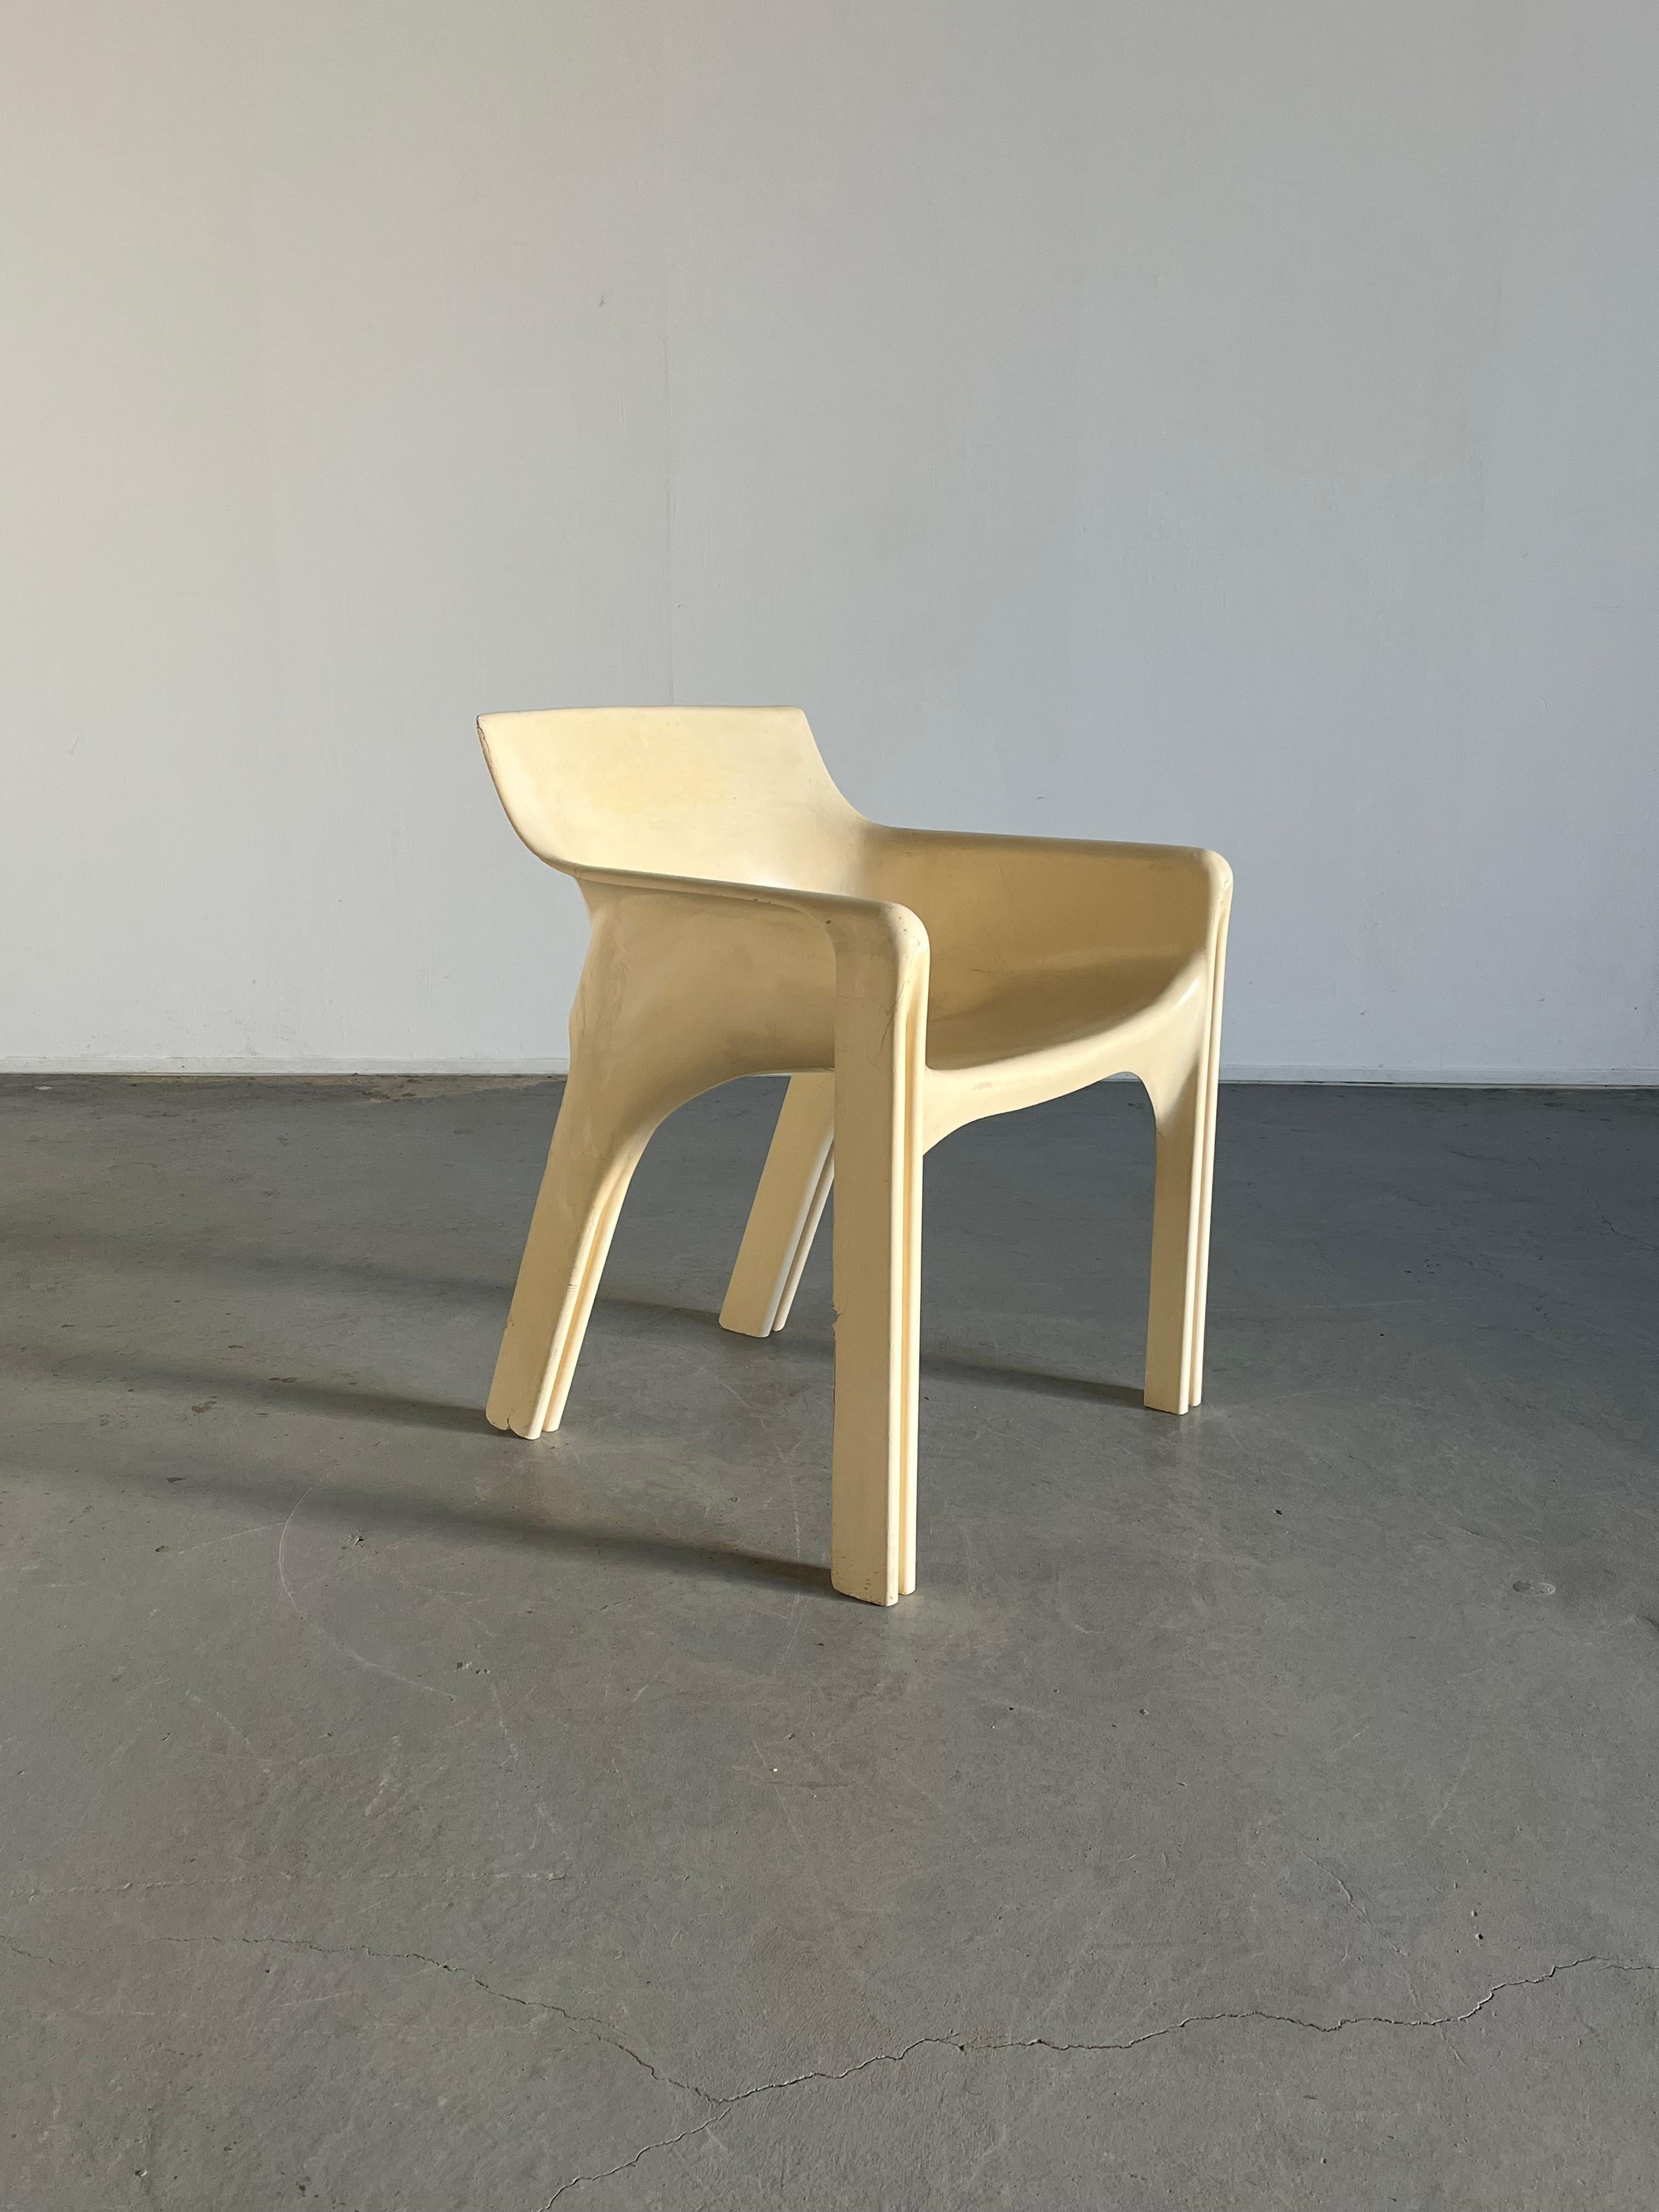 Iconic 'Gaudi' chair designed by Vico Magistretti and produced by Artemide, Italy. Named after Antonio Gaudi.

Single piece construction chair that comes from a pressure mold of polyester resin reinforced with fiberglas to withstand heat and